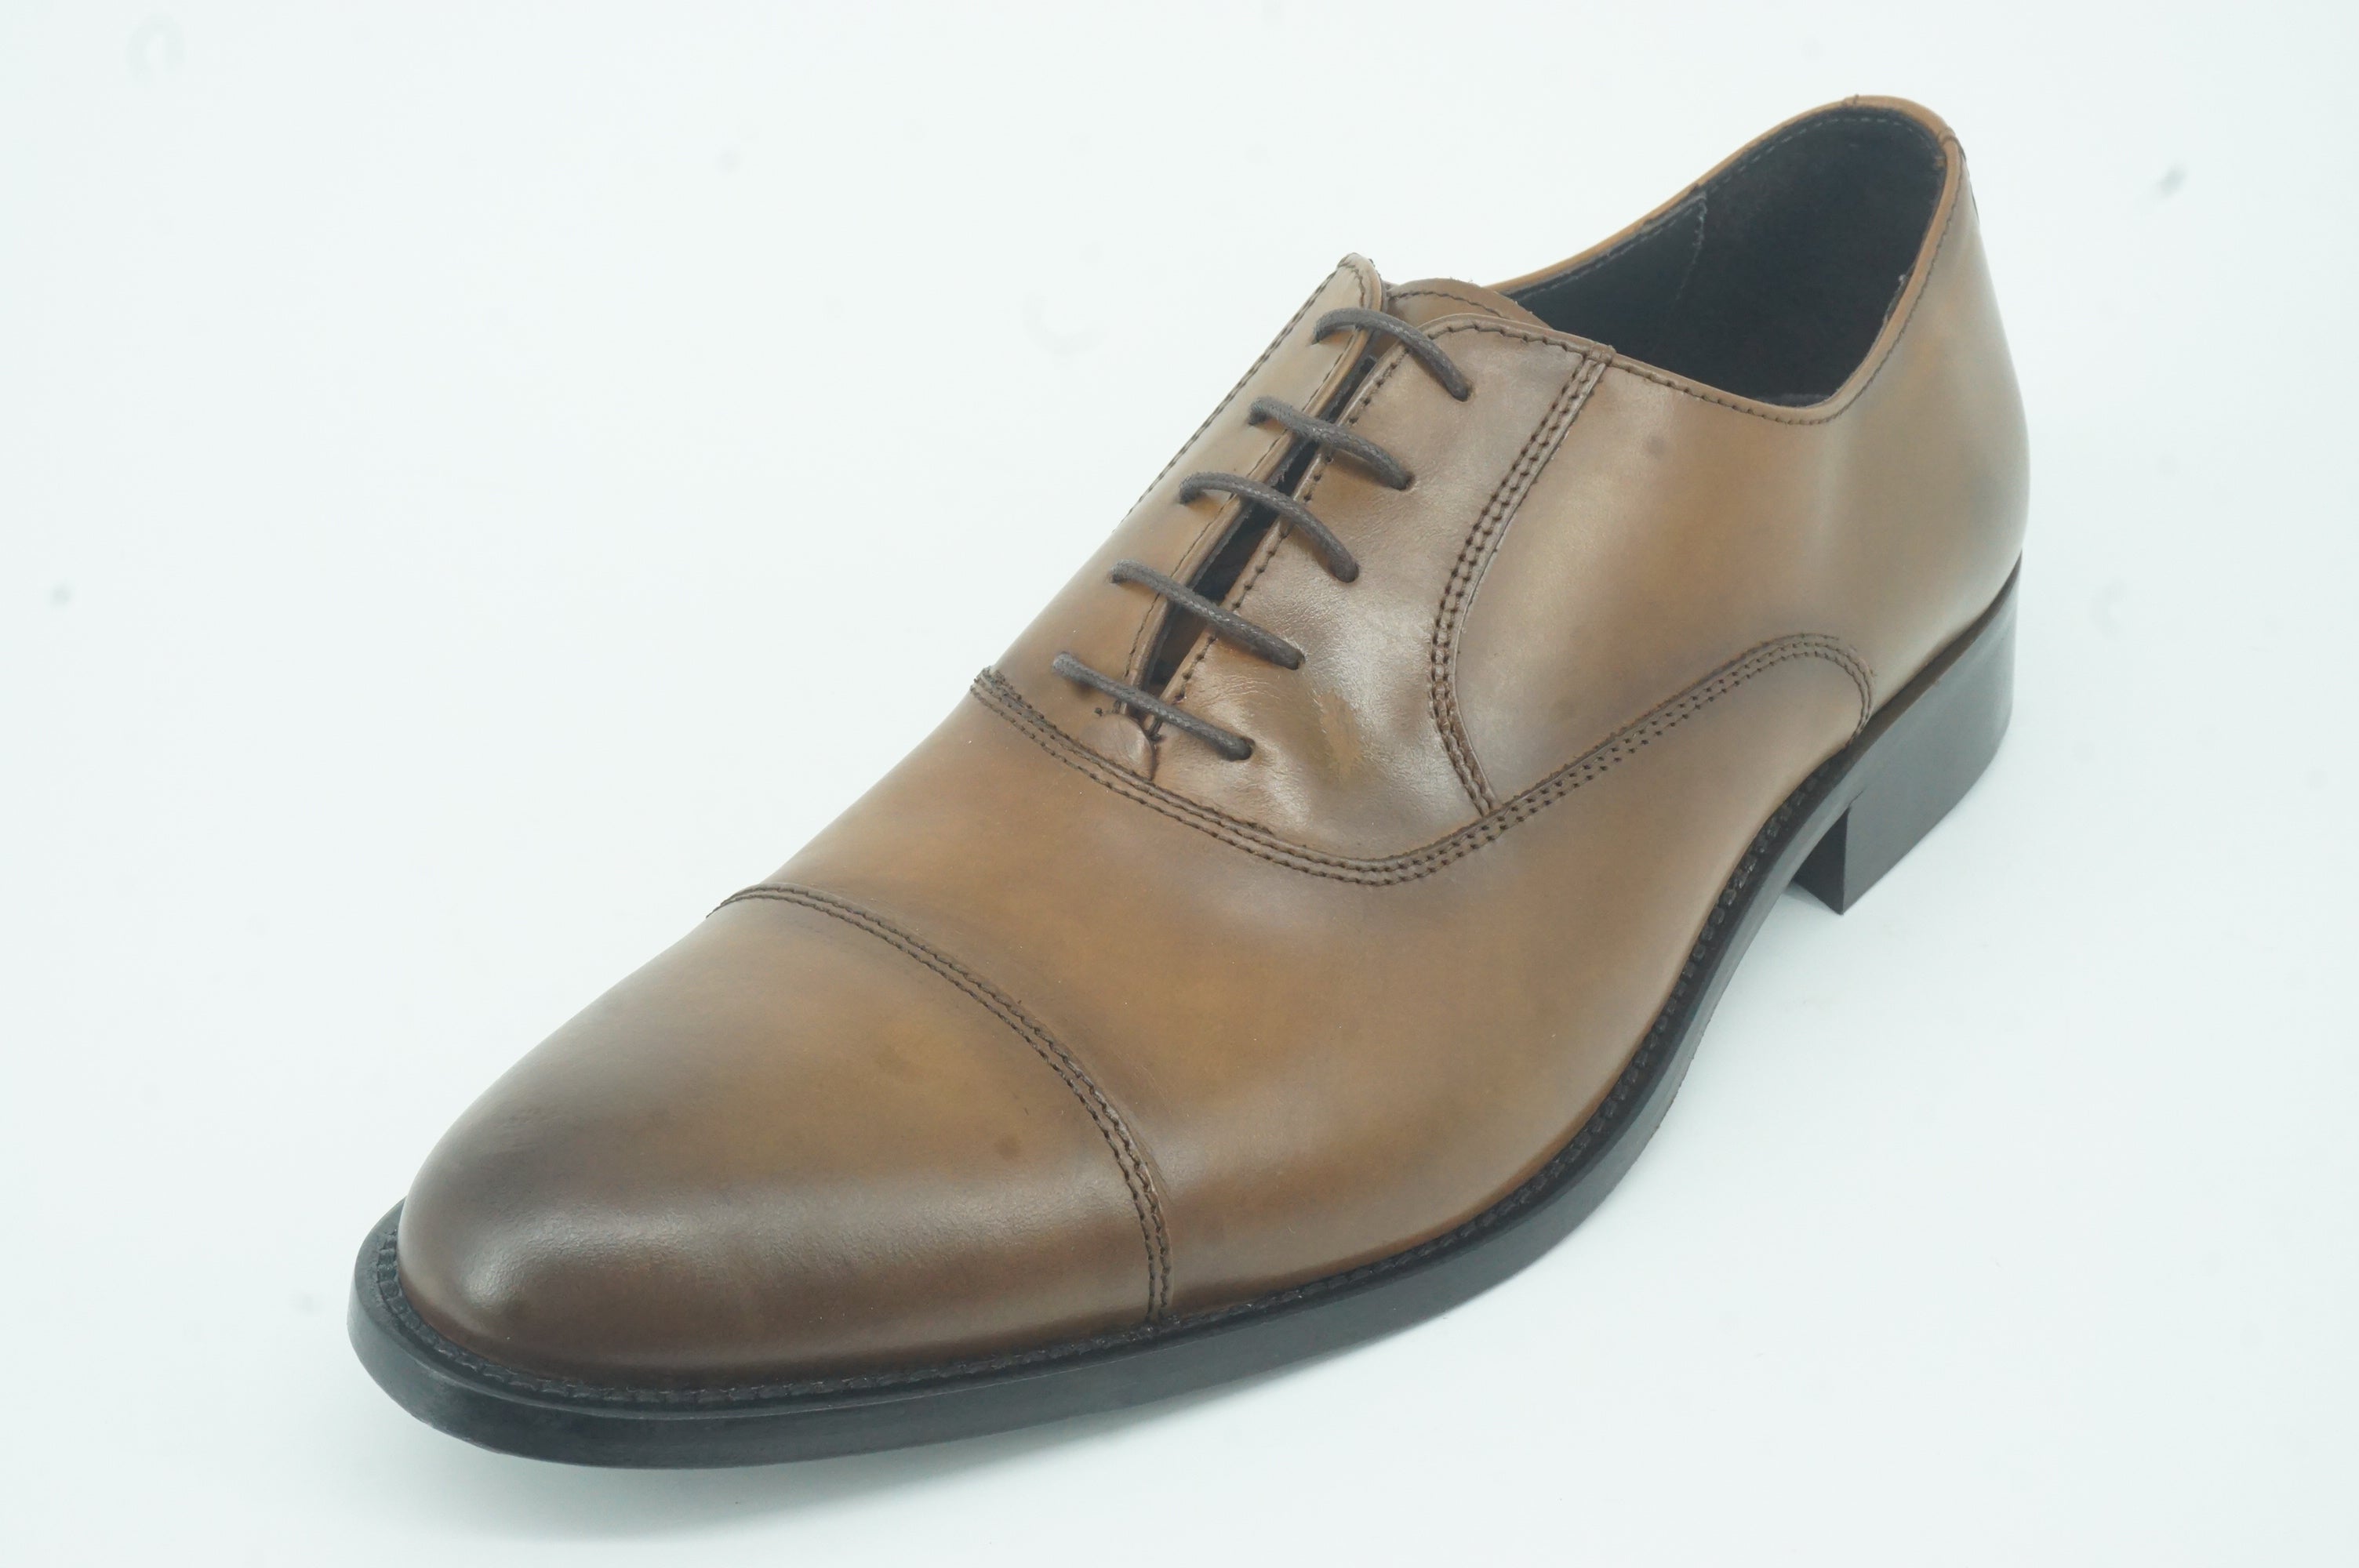 To Boot New York Caufield Men's Brown Leather Cap Toe Oxfords Size 13 D $395